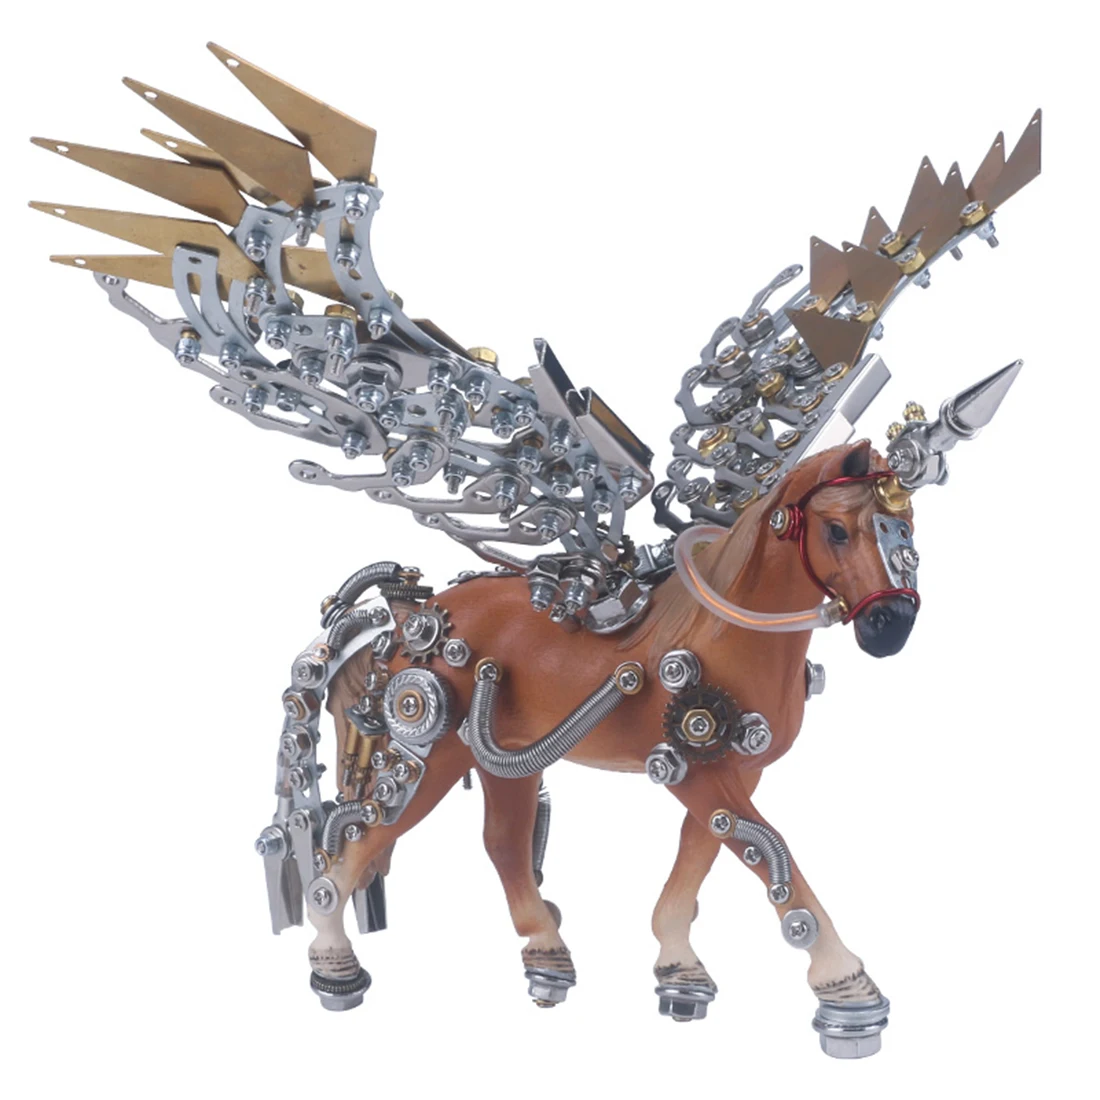 

752Pcs DIY Metal Mechanical Unicorn Puzzle Model Kit 3D Assembly Toys Educational Toy Kids Christmas Gift Drop Shipping